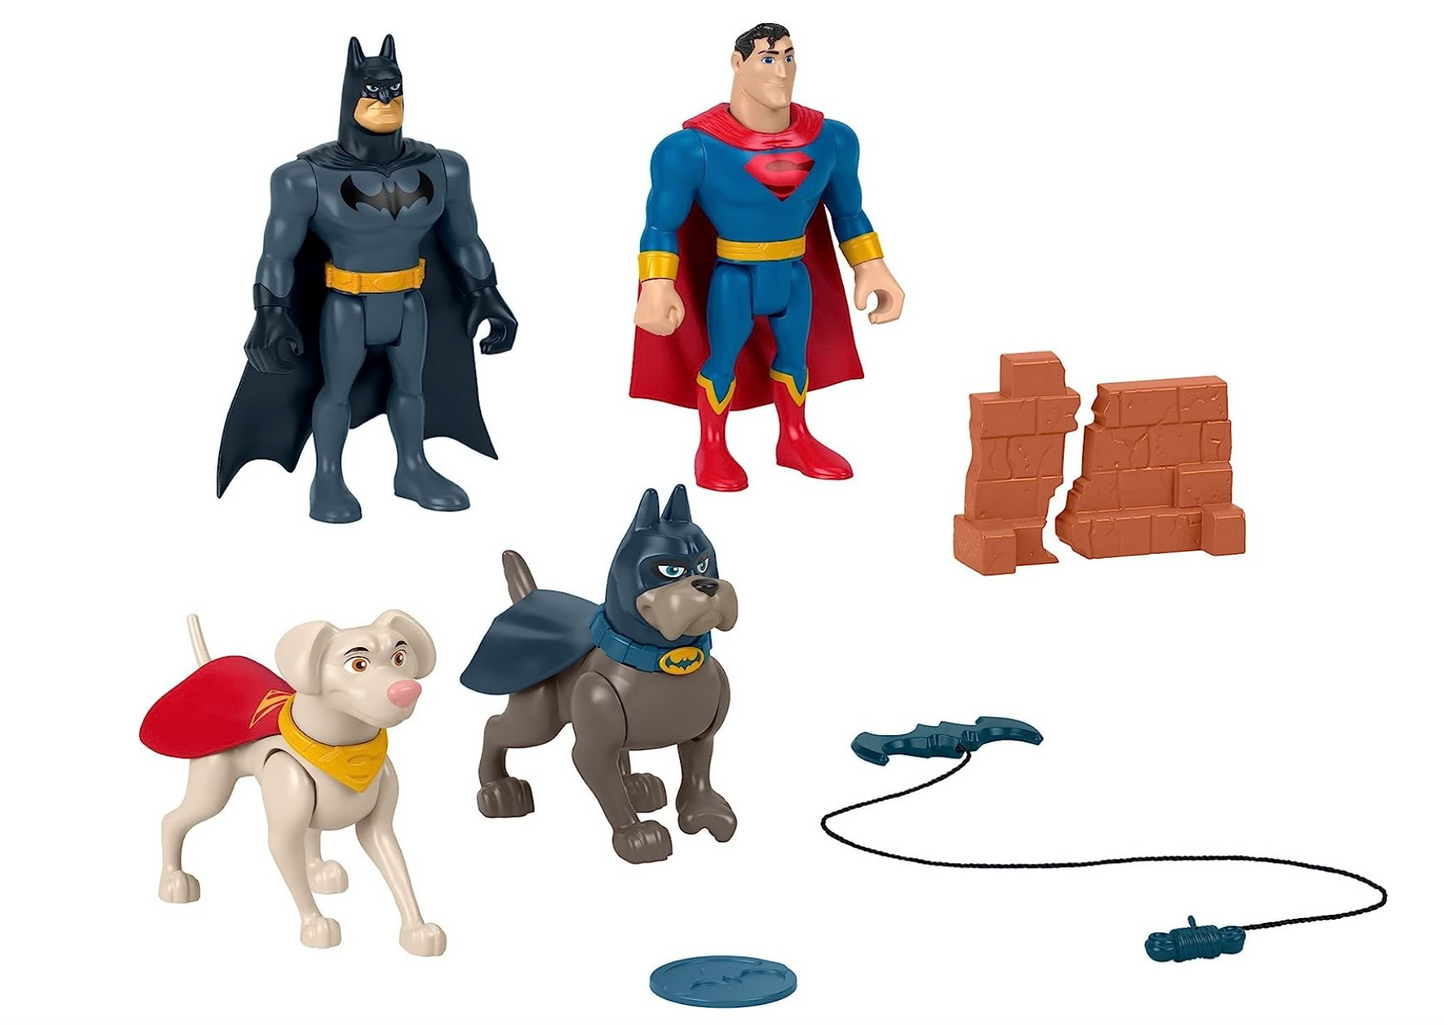 Fisher-Price DC League of Super-Pets Super Hero and Action Pet Gift Set with Batman Superman Krypto & Ace for Ages 3+ Years